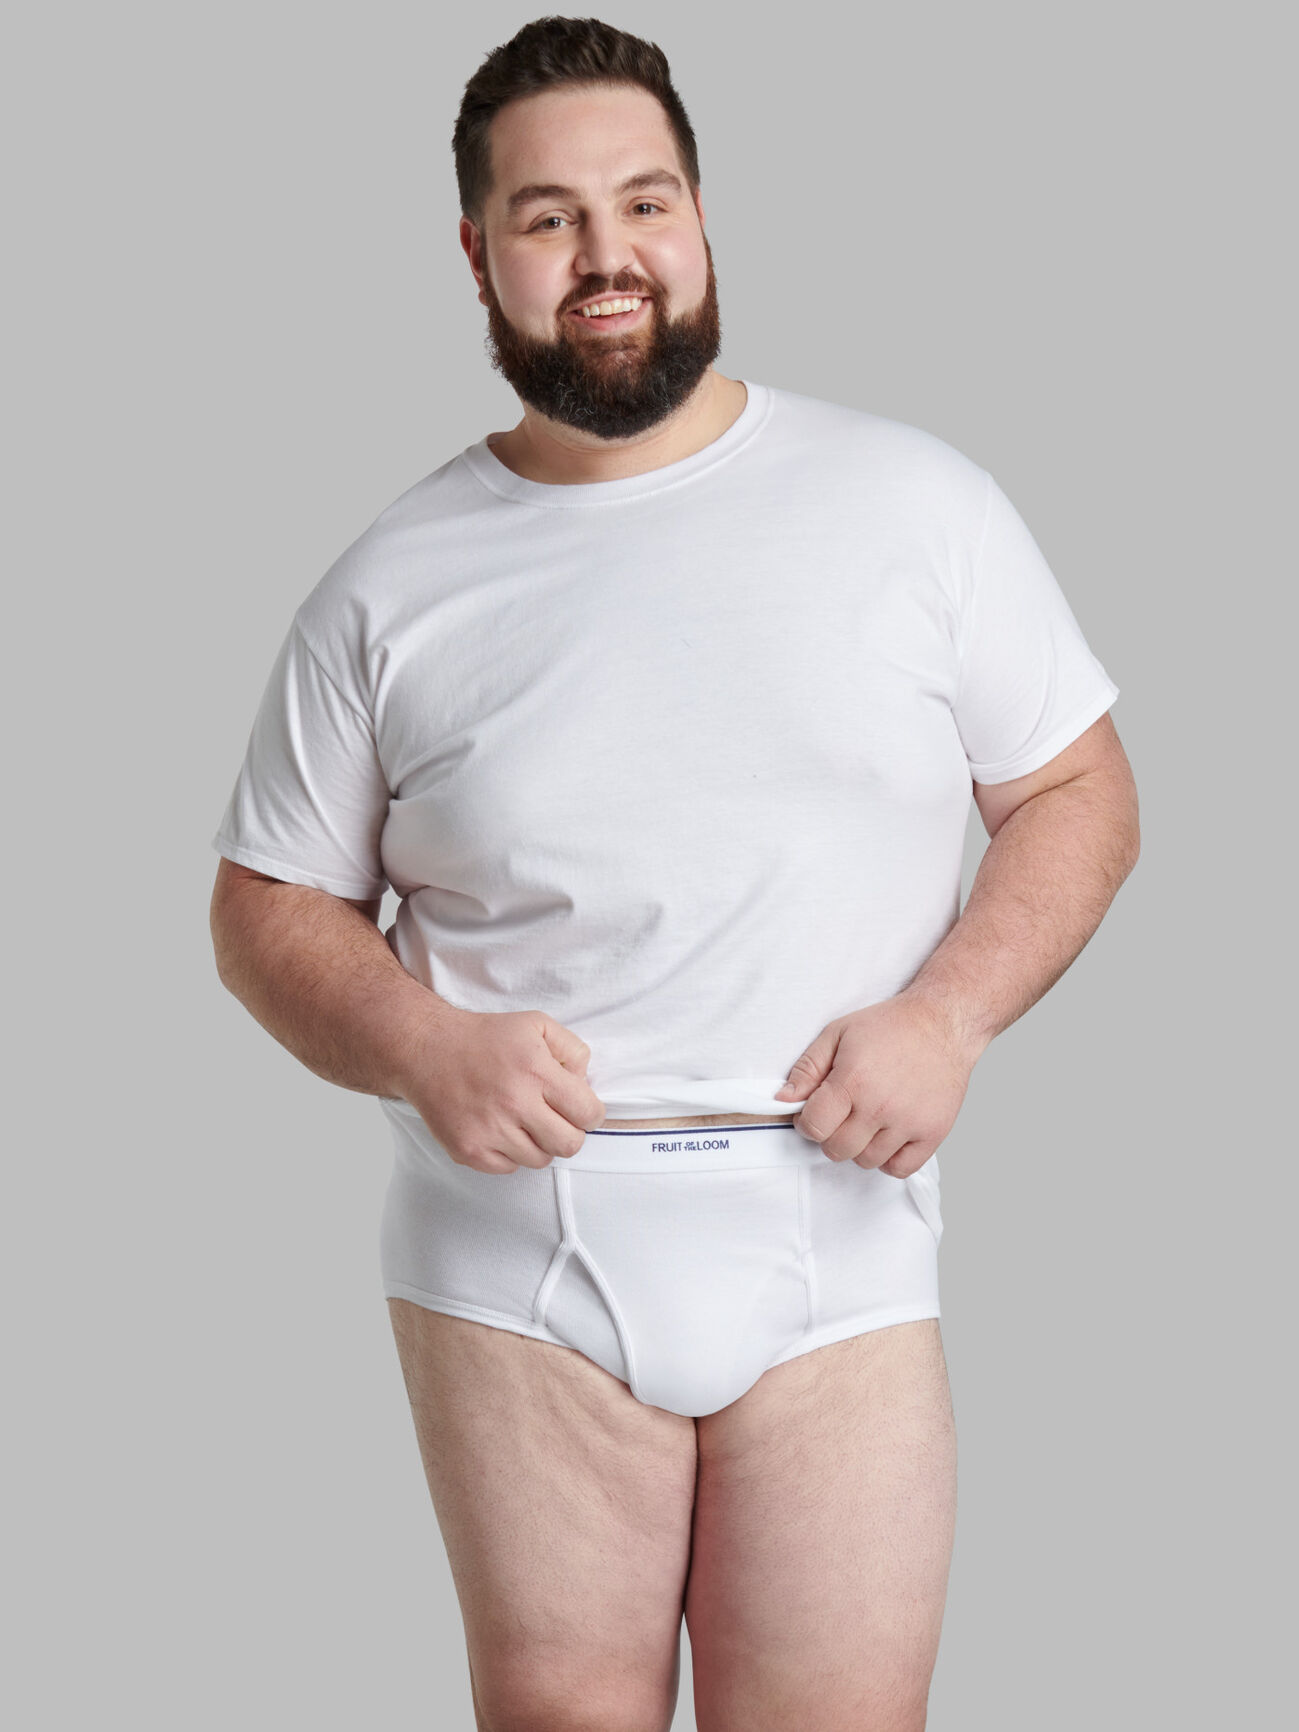 Fruit of the Loom Men's White Briefs Underwear, 6 Pack, Size Small to 3XL